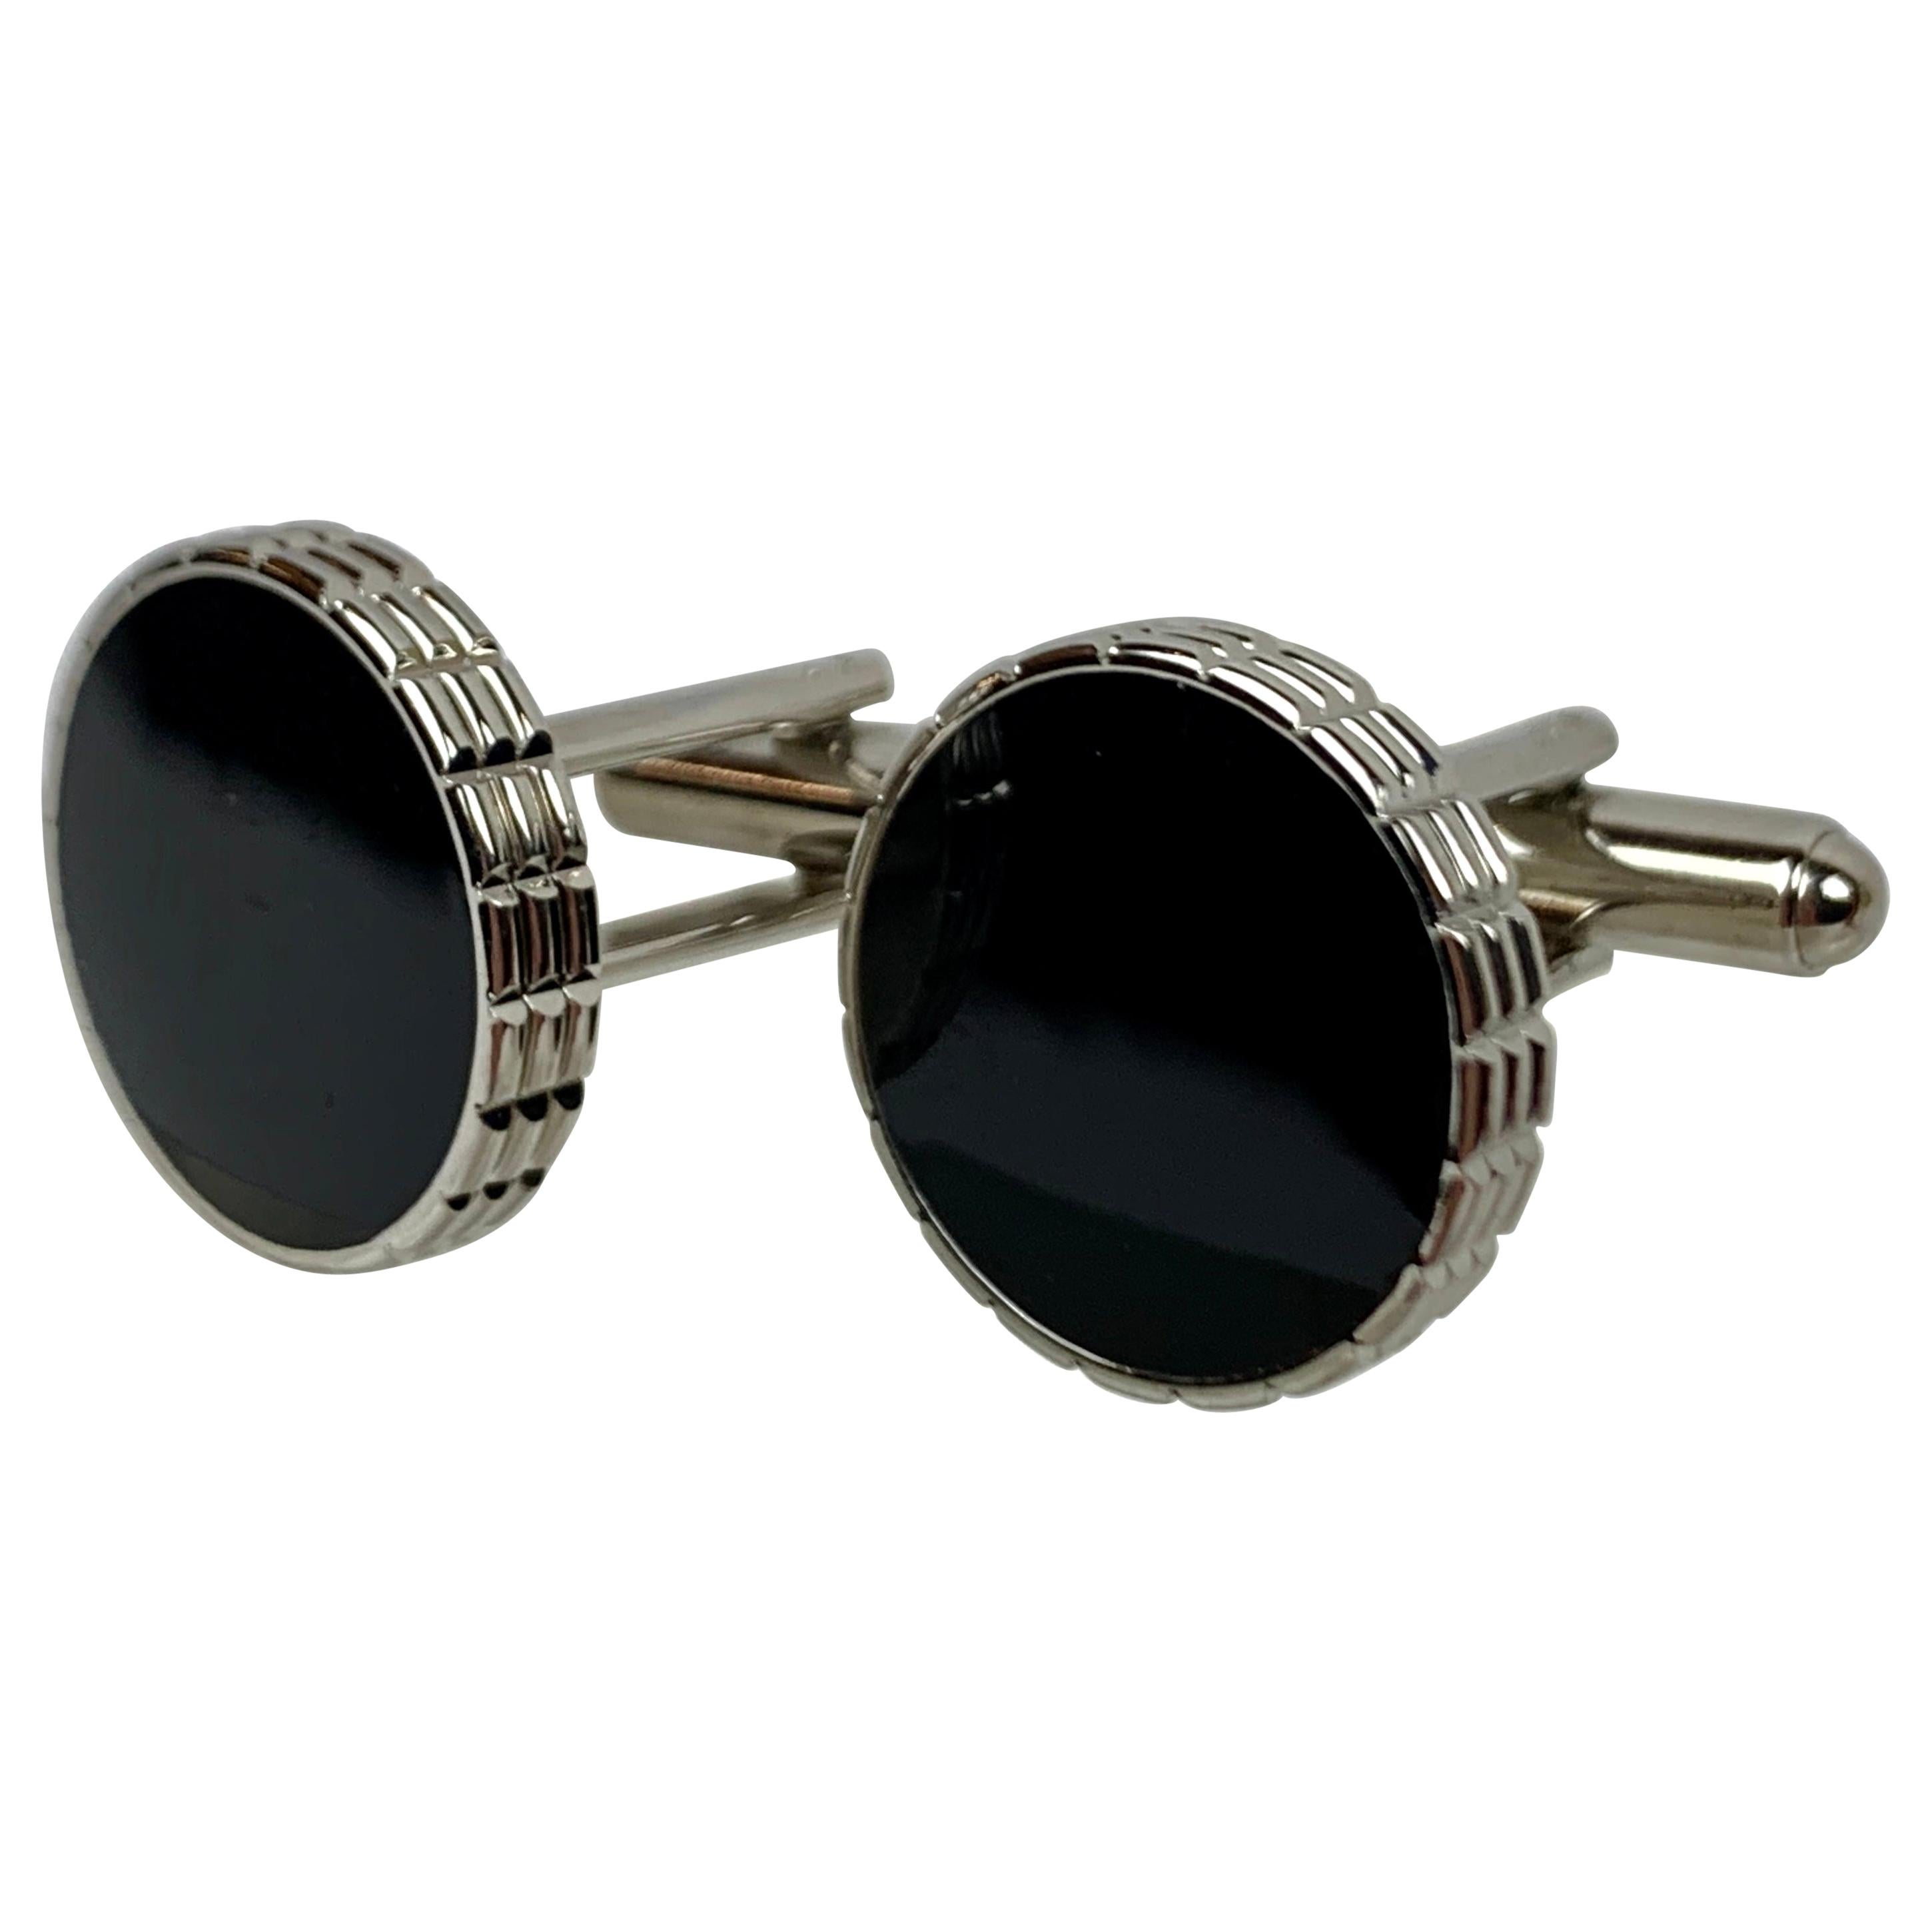 A Pair of Round Cufflinks with Insets of Black Enamel-American, c. 1950's-60's